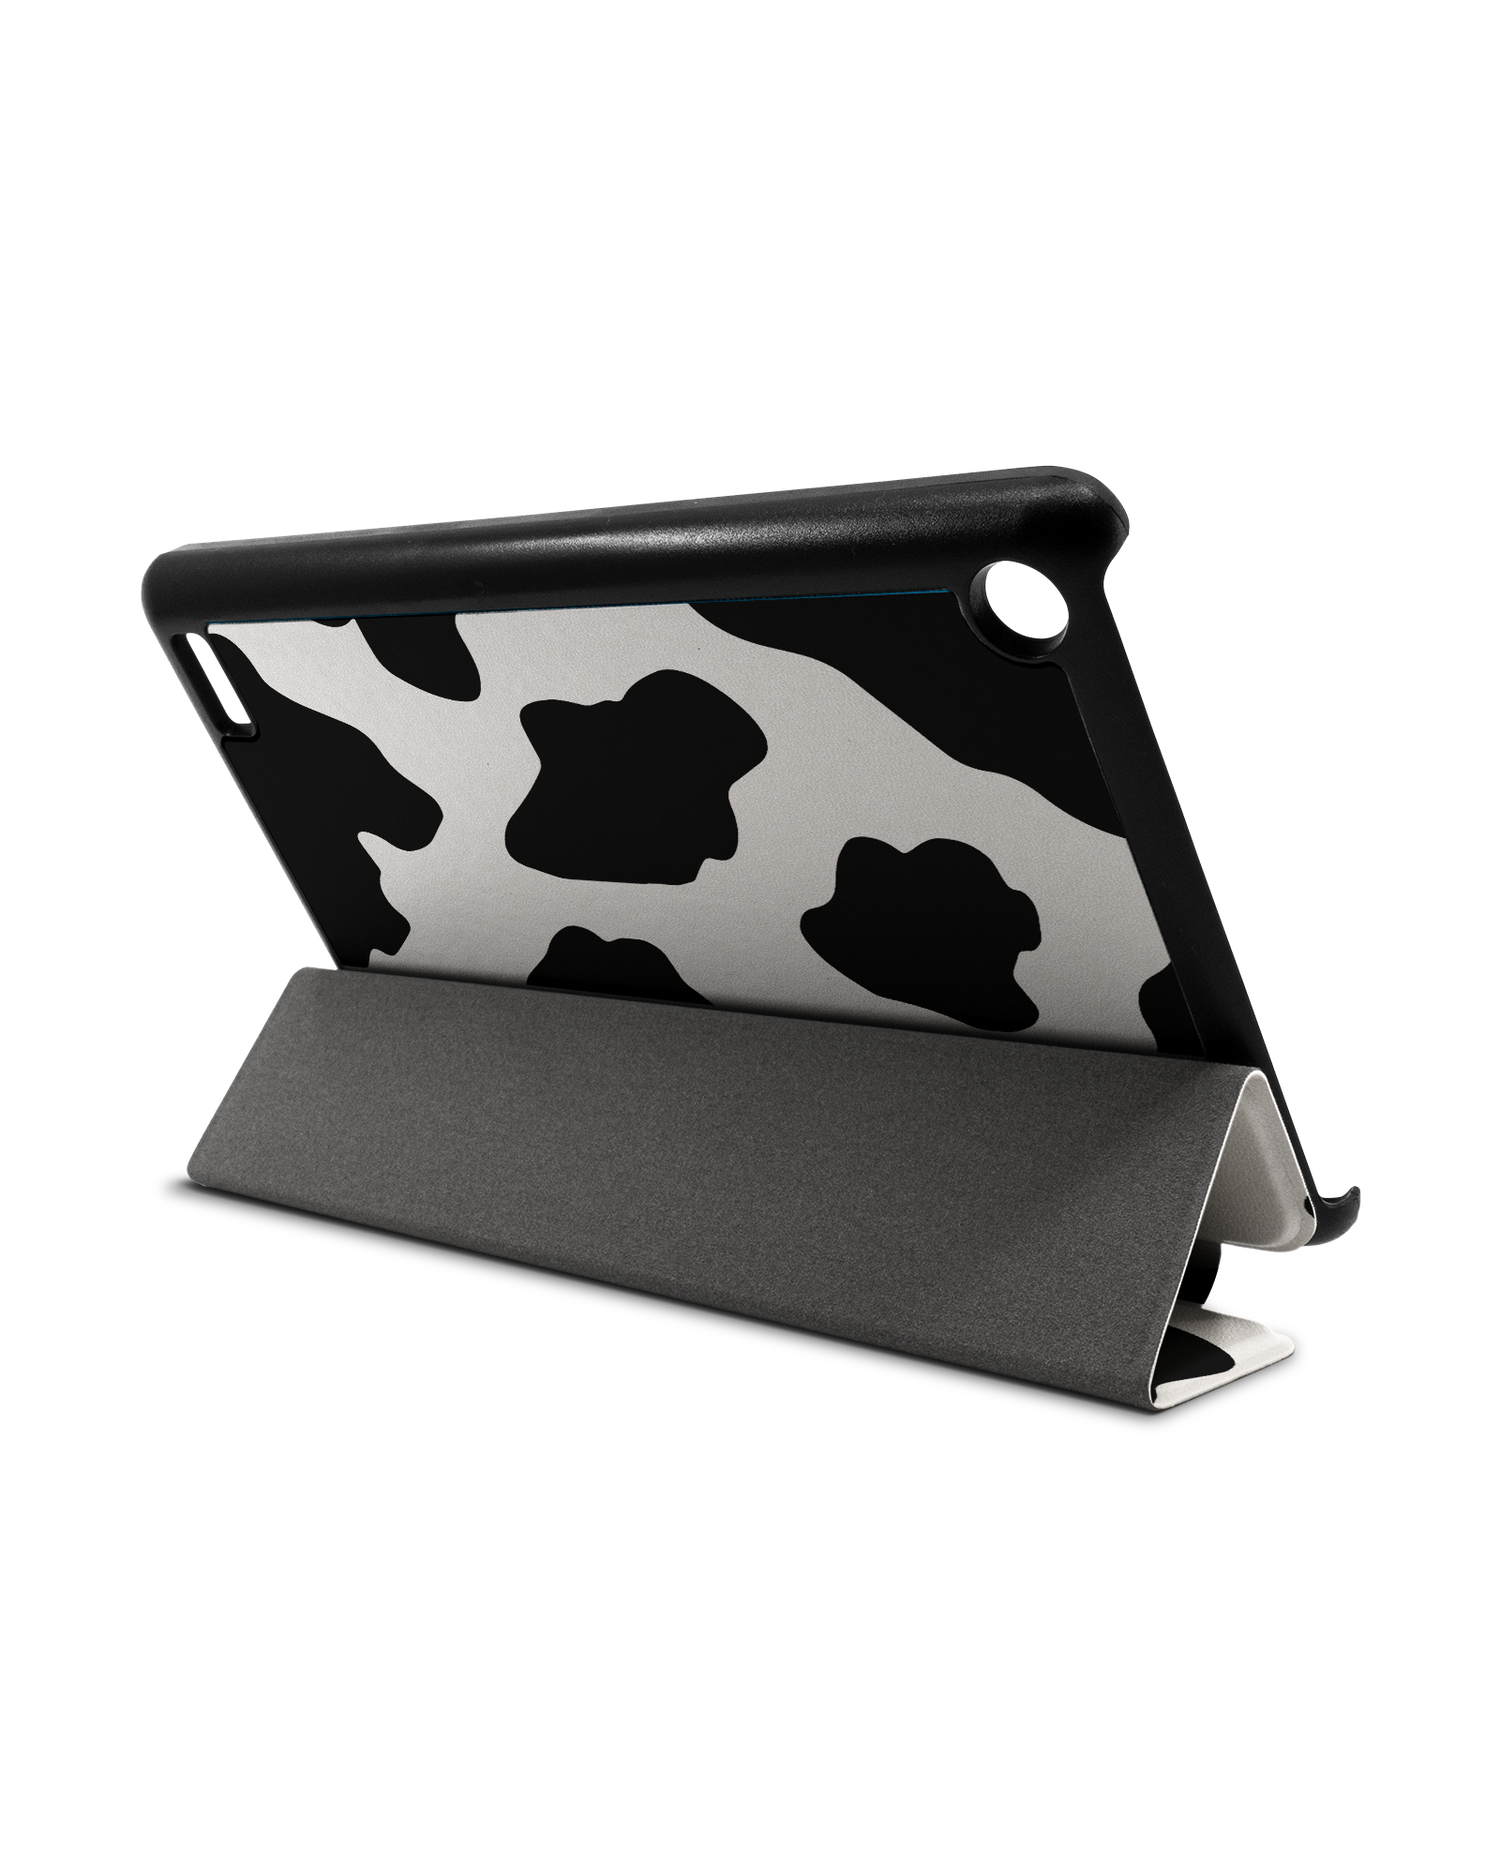 Cow Print 2 Tablet Smart Case for Amazon Fire 7: Used as Stand